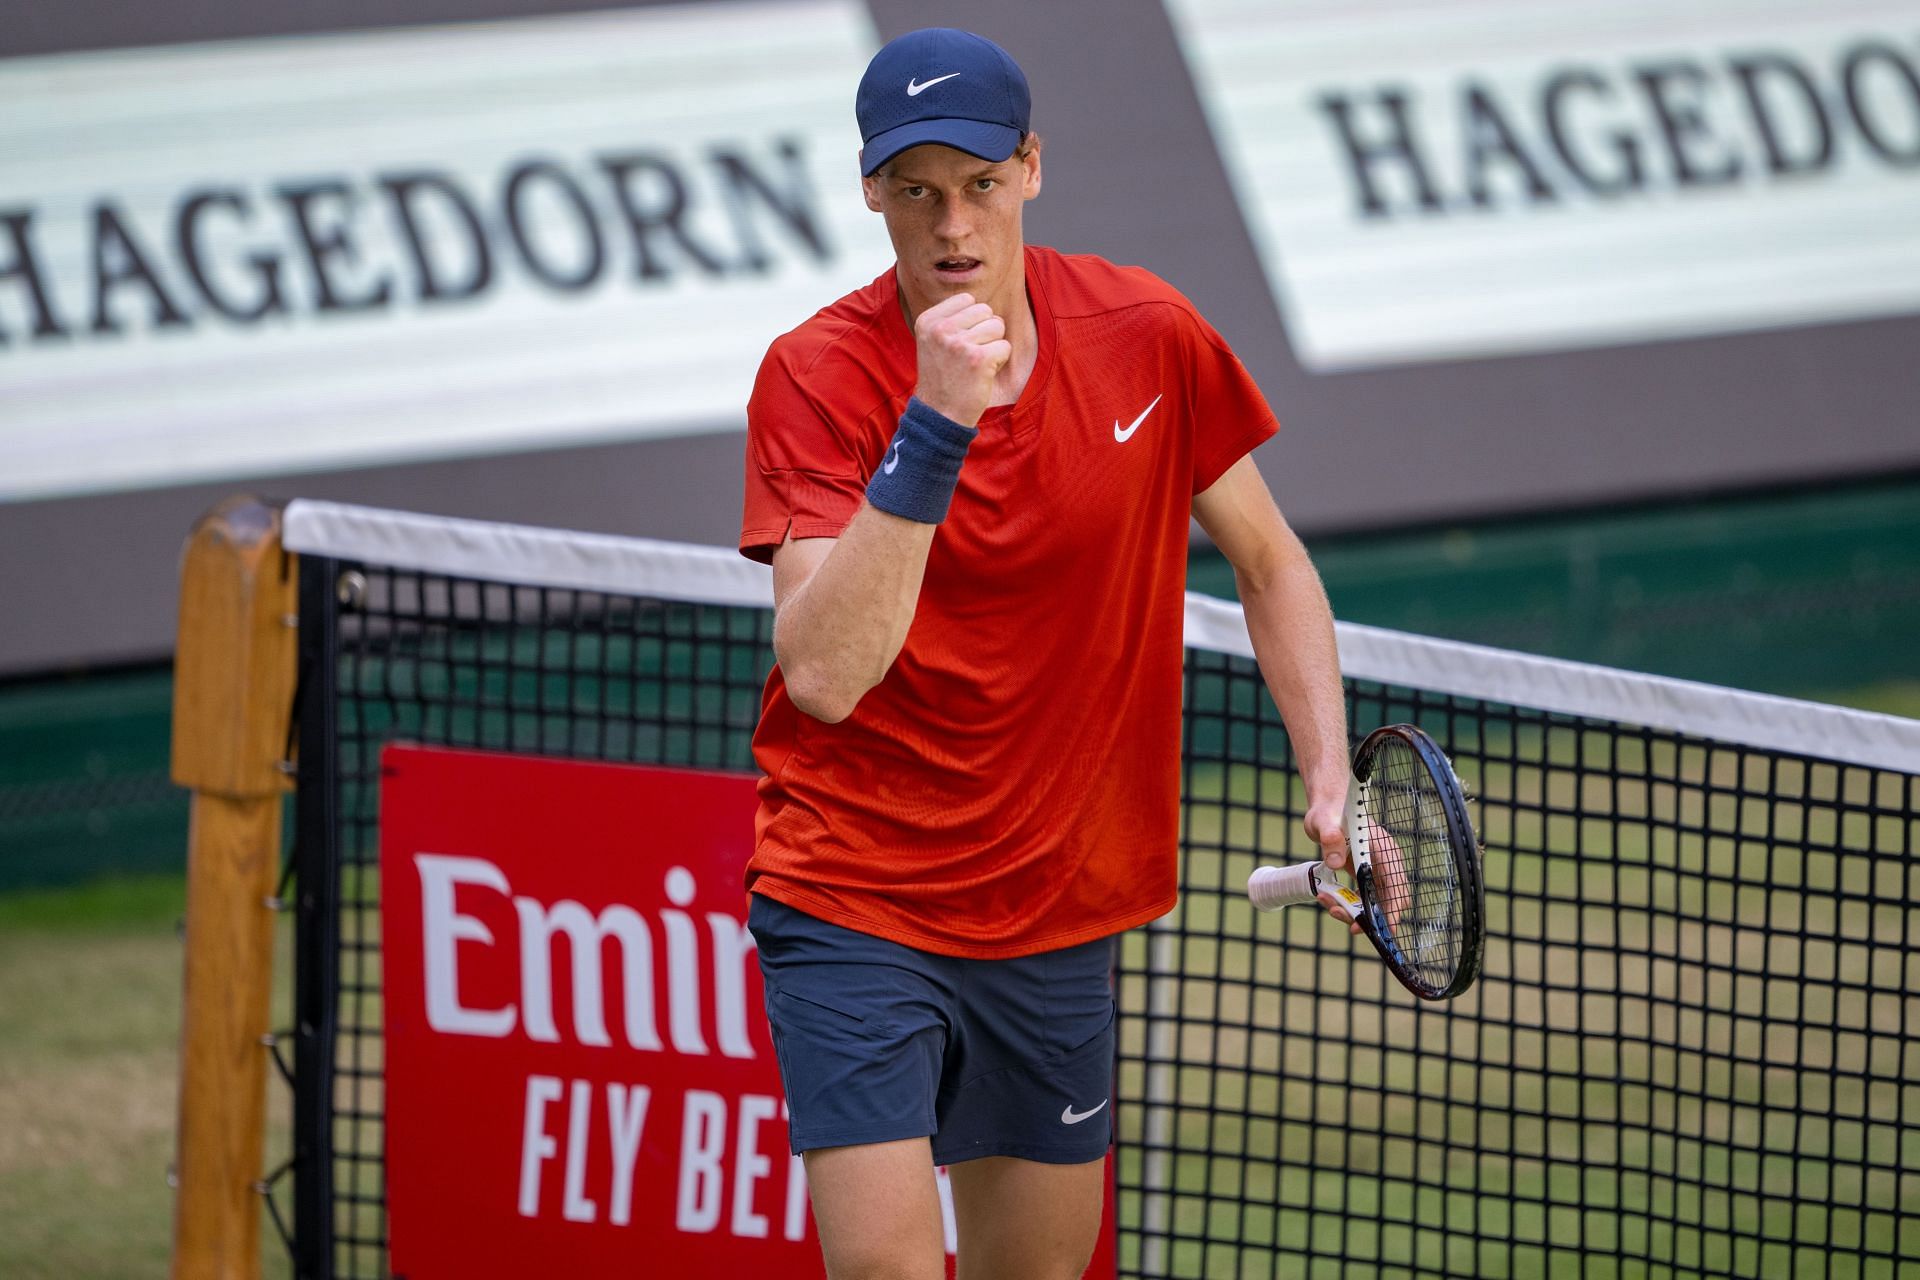 Jannik Sinner won the Halle Open last week and will be the top seed at Wimbledon